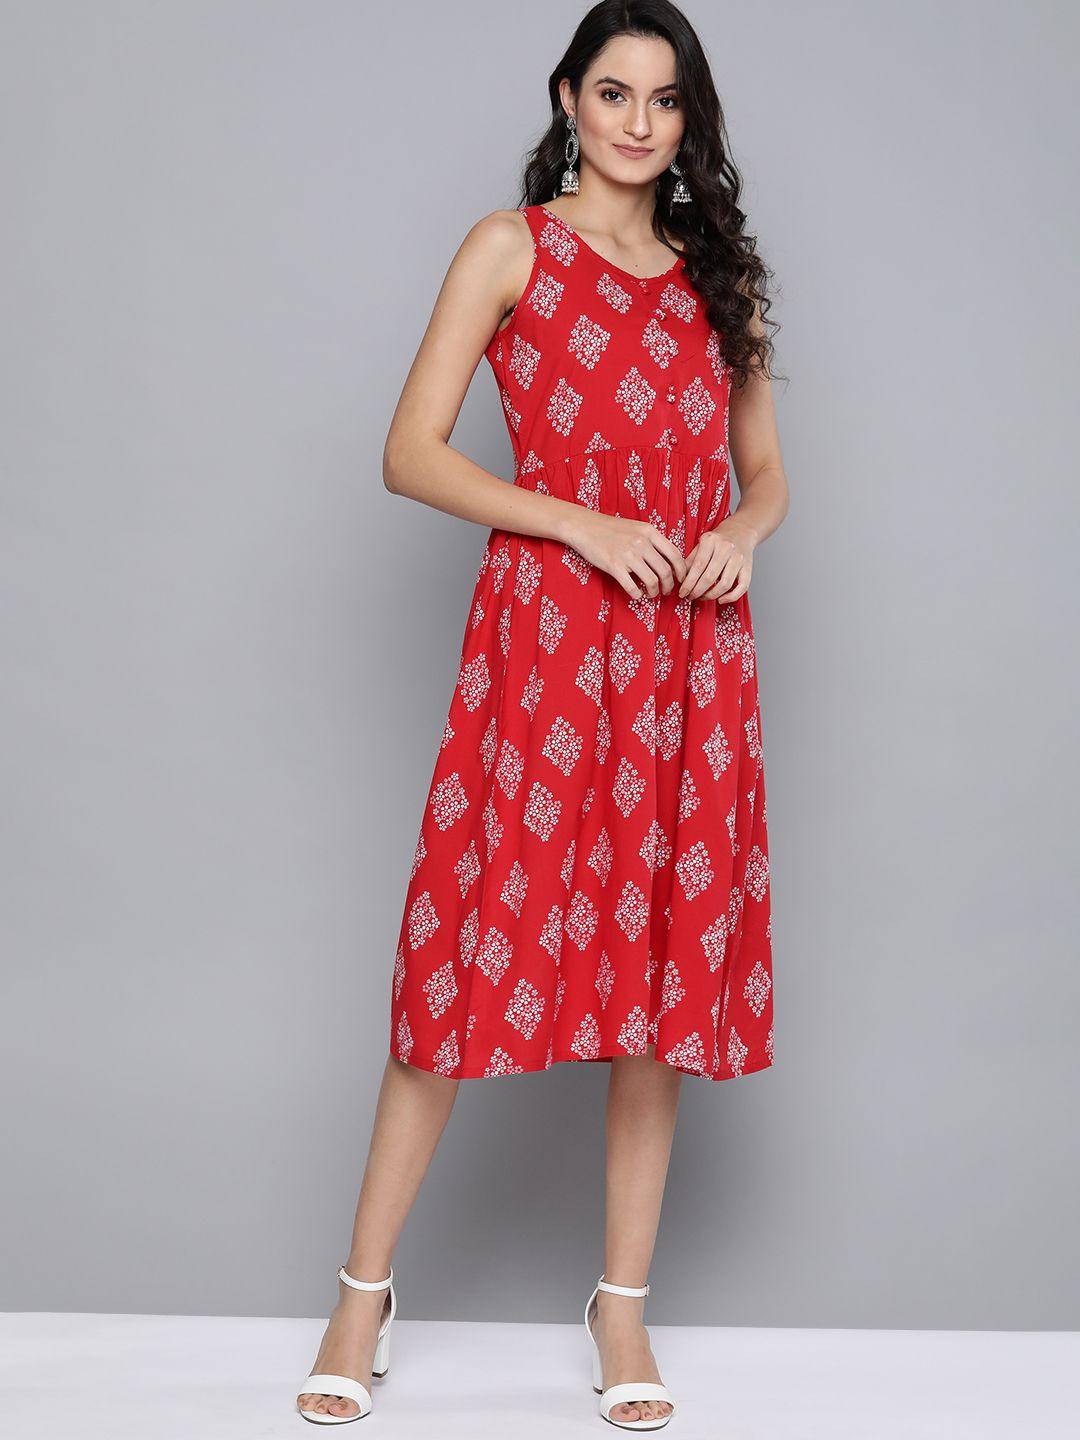 here&now women red & white floral print pure cotton midi a-line dress